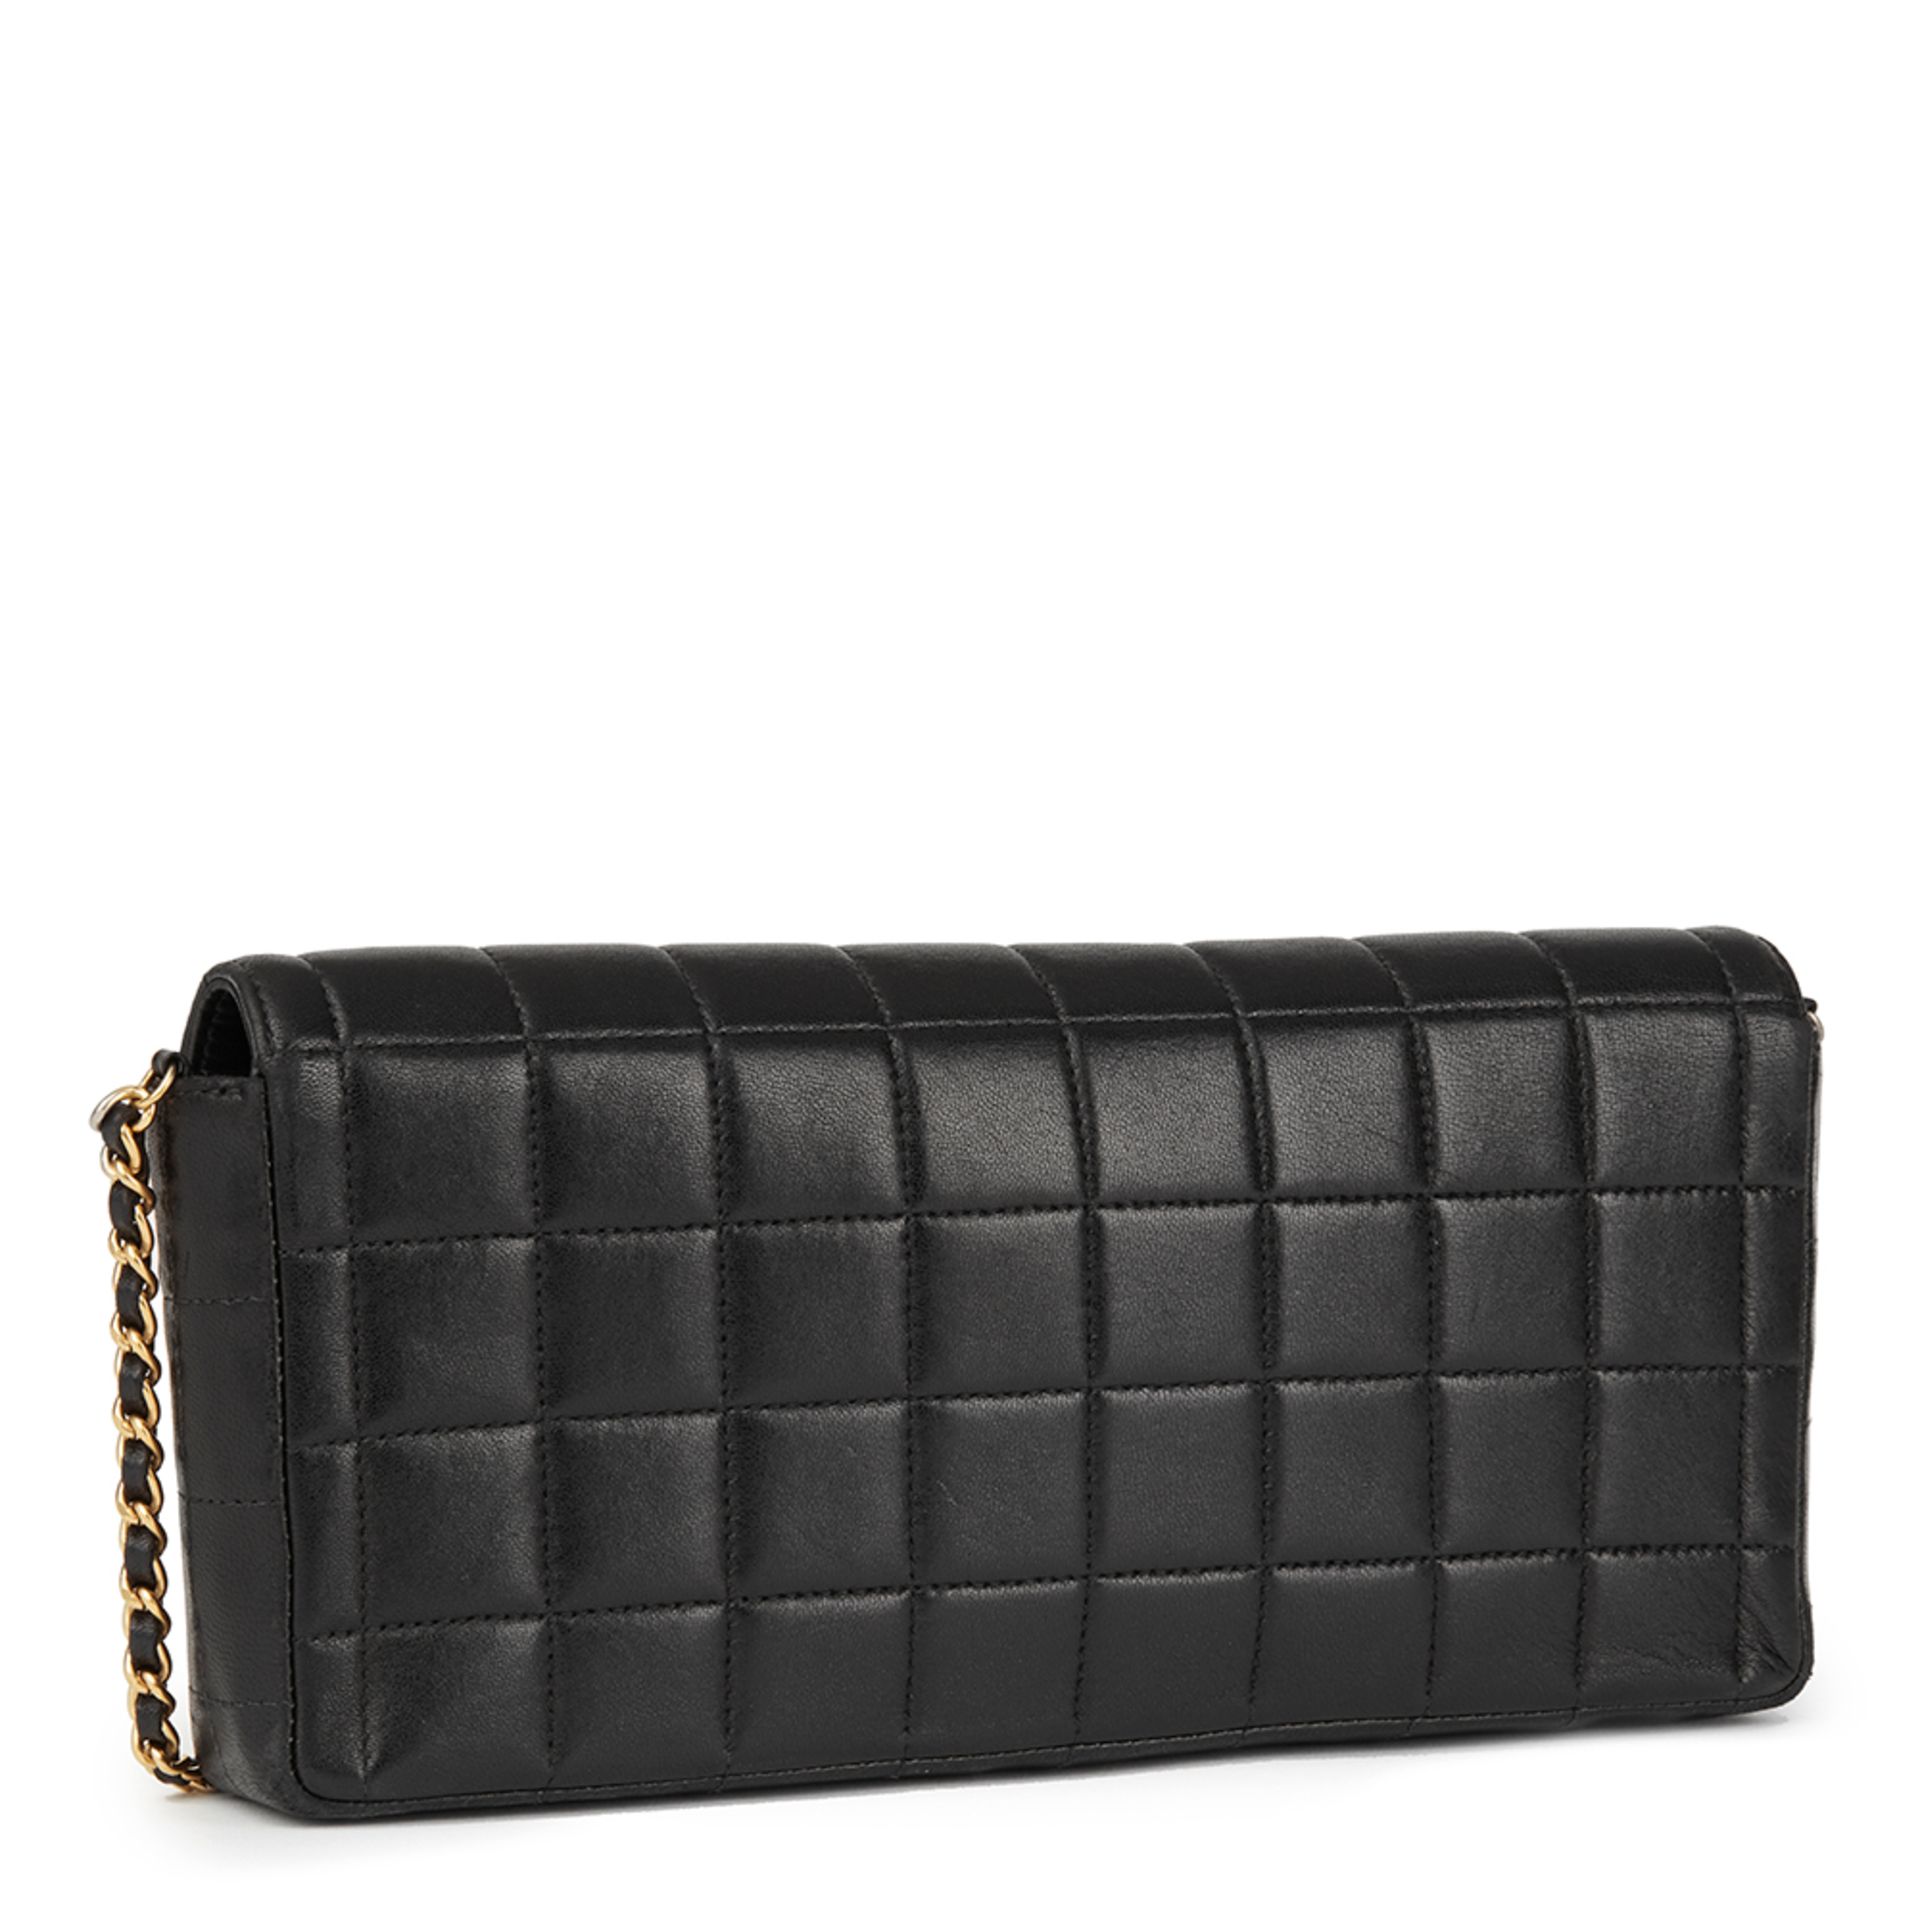 Chanel Black Quilted Lambskin East West Chocolate Bar Flap Bag - Image 3 of 11